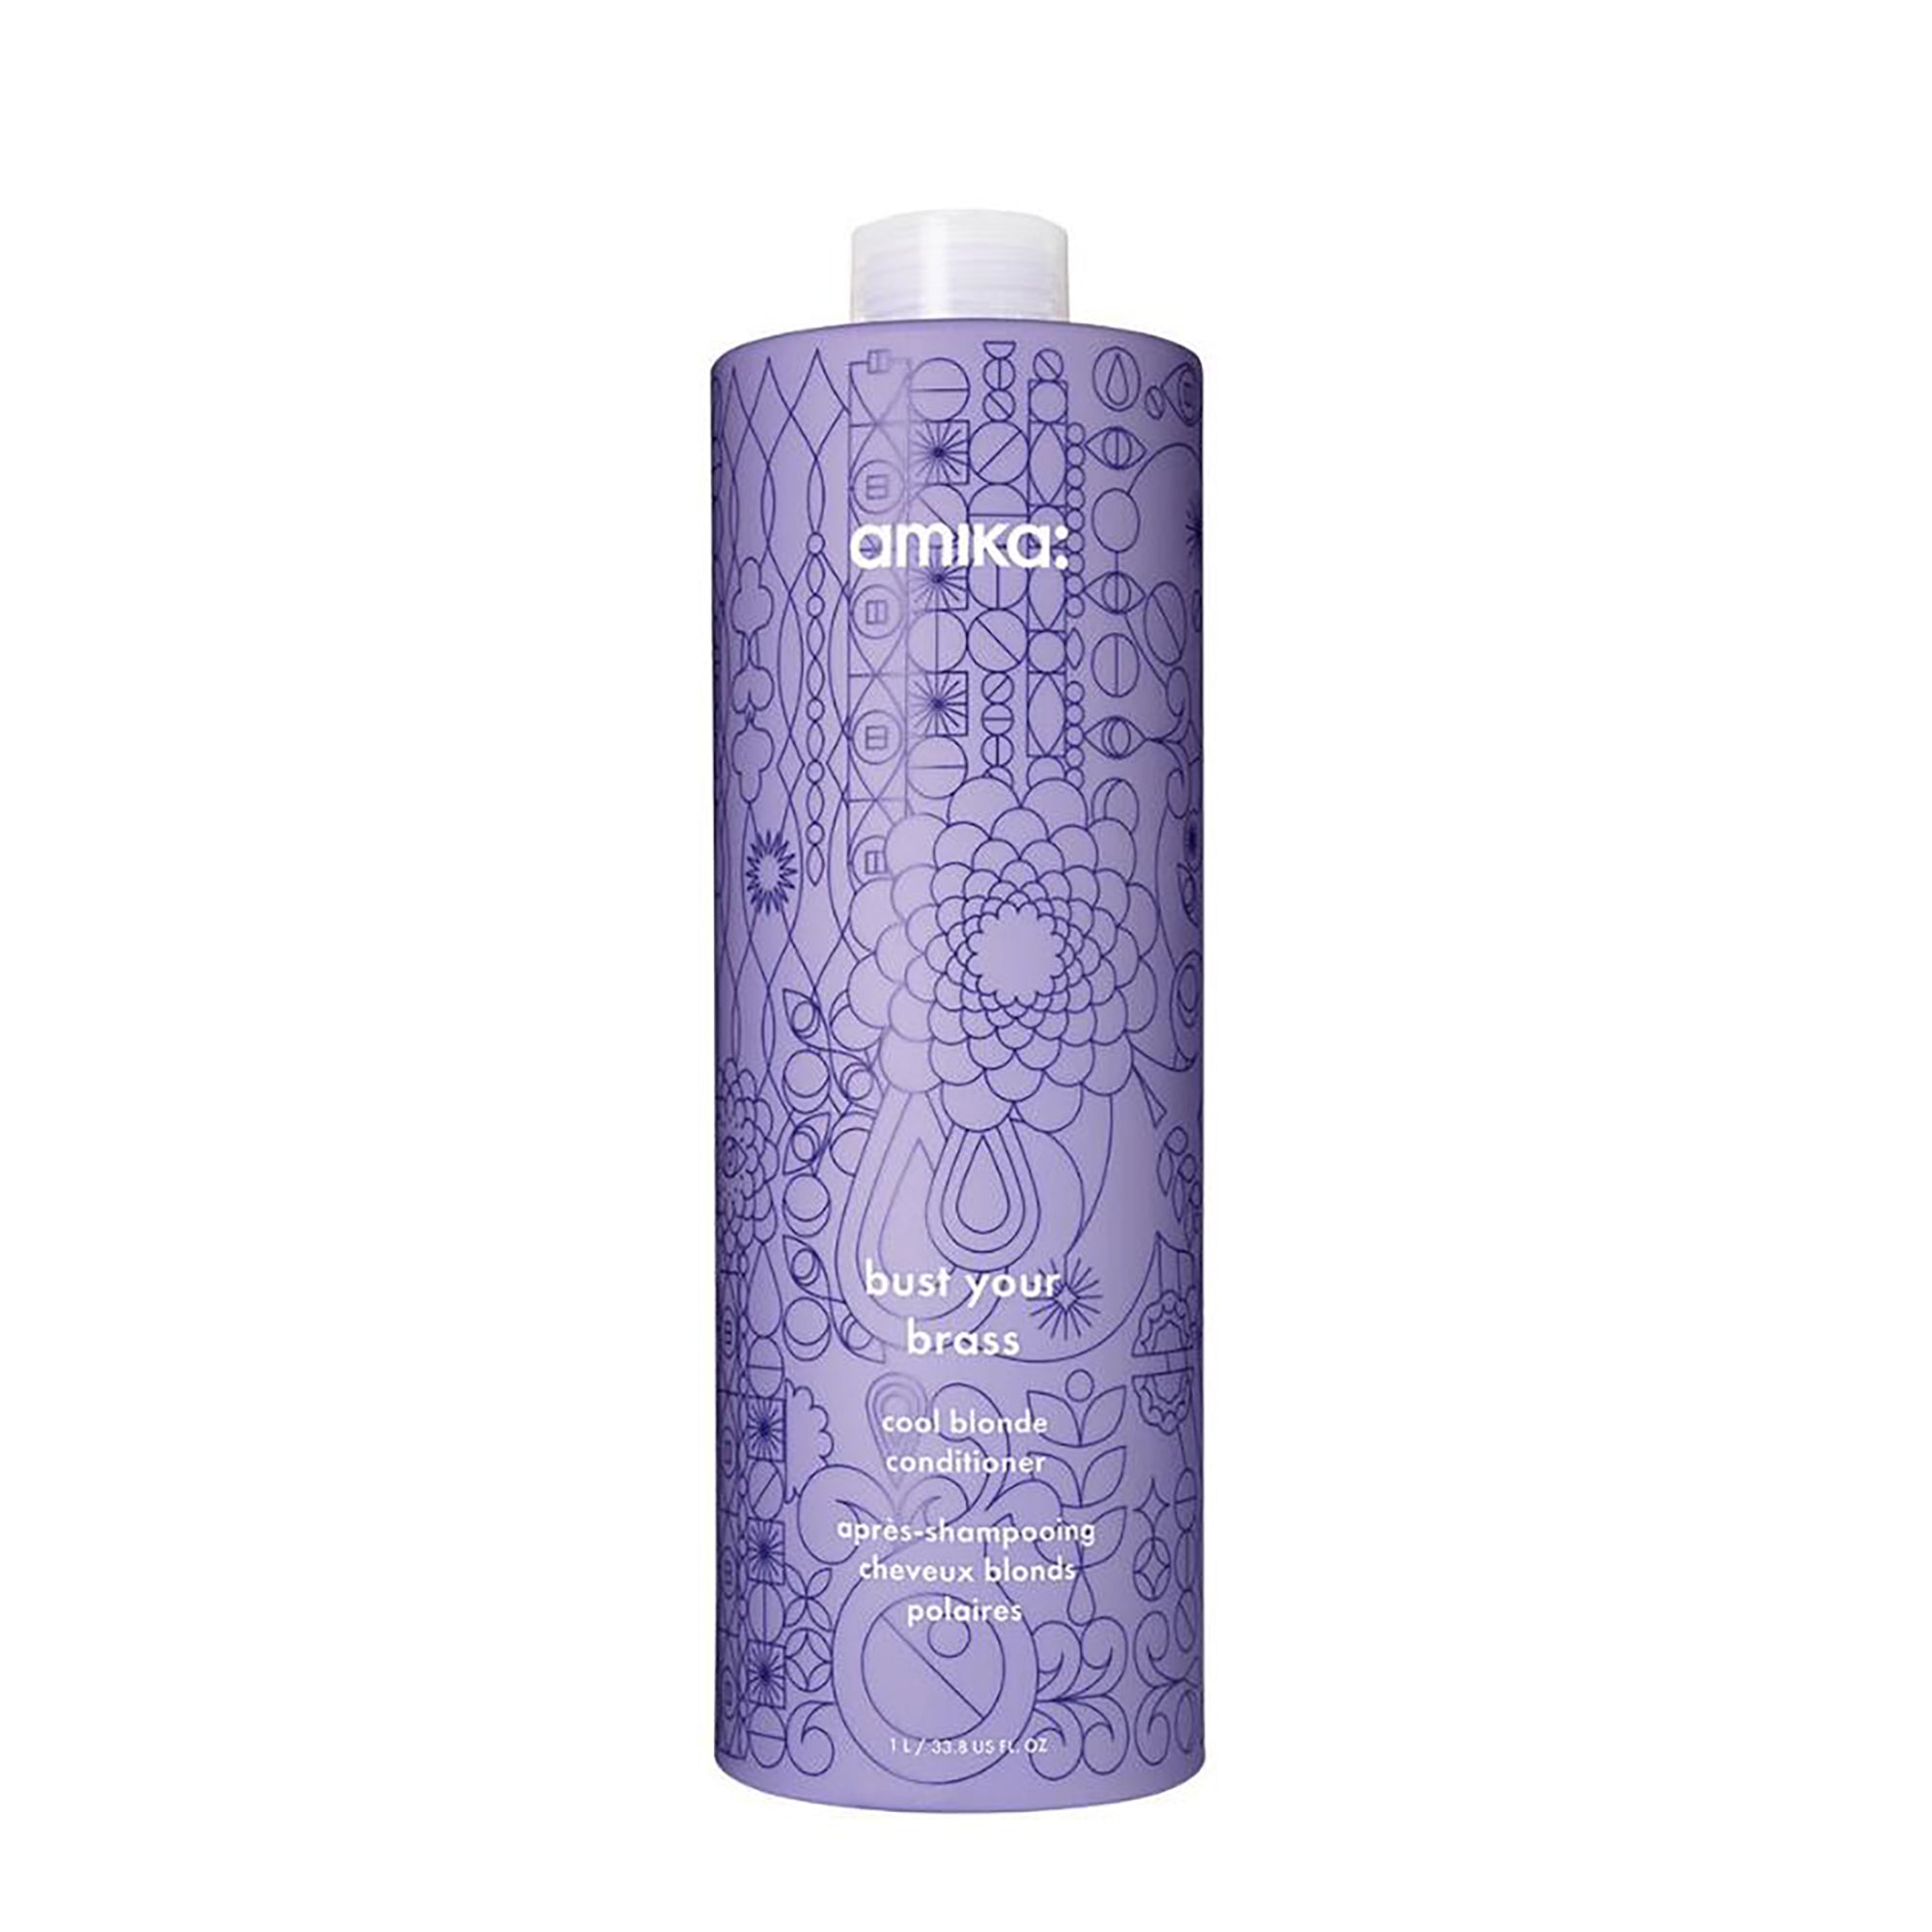 Amika Bust Your Brass Cool Blonde Shampoo and Conditioner Liter Duo ($150 Value) / 32OZ